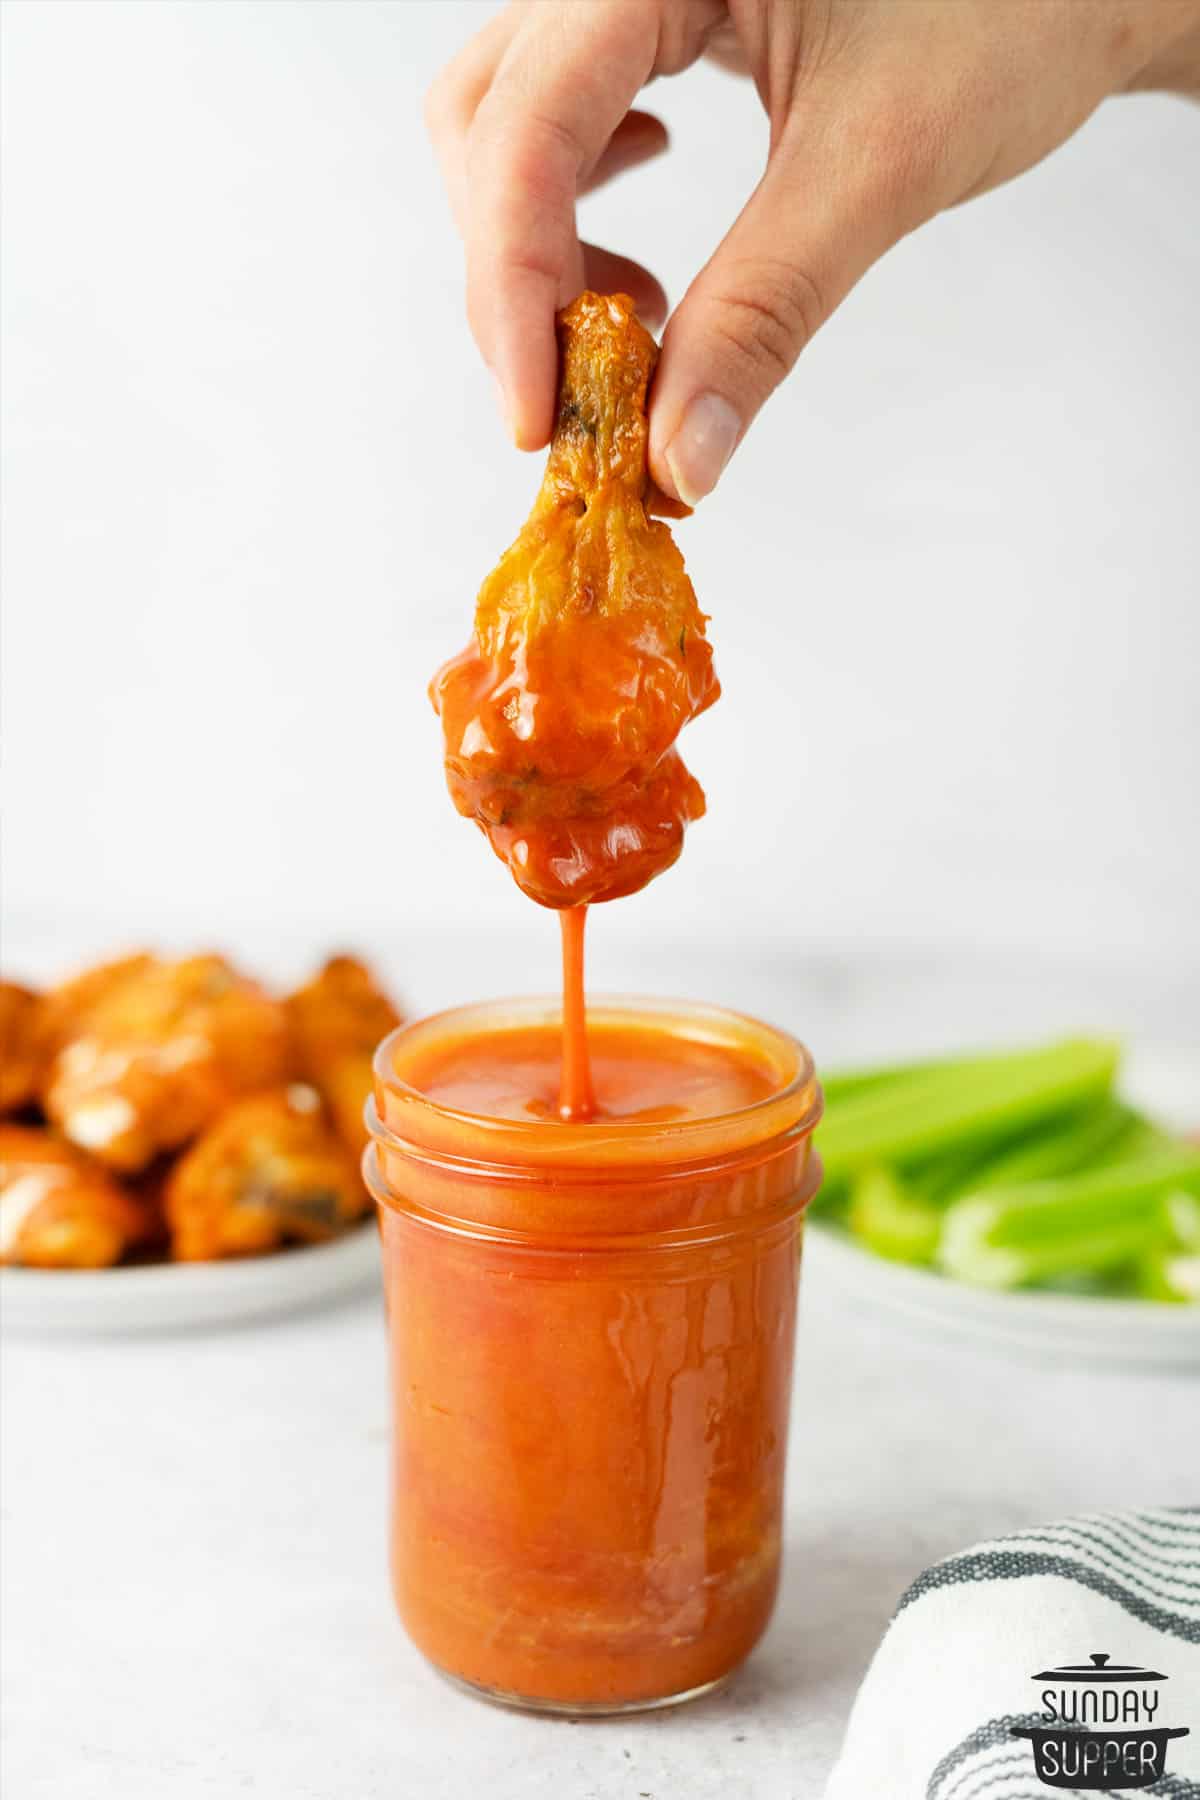 Three Simple Ingredients for Homemade Buffalo Wing Sauce